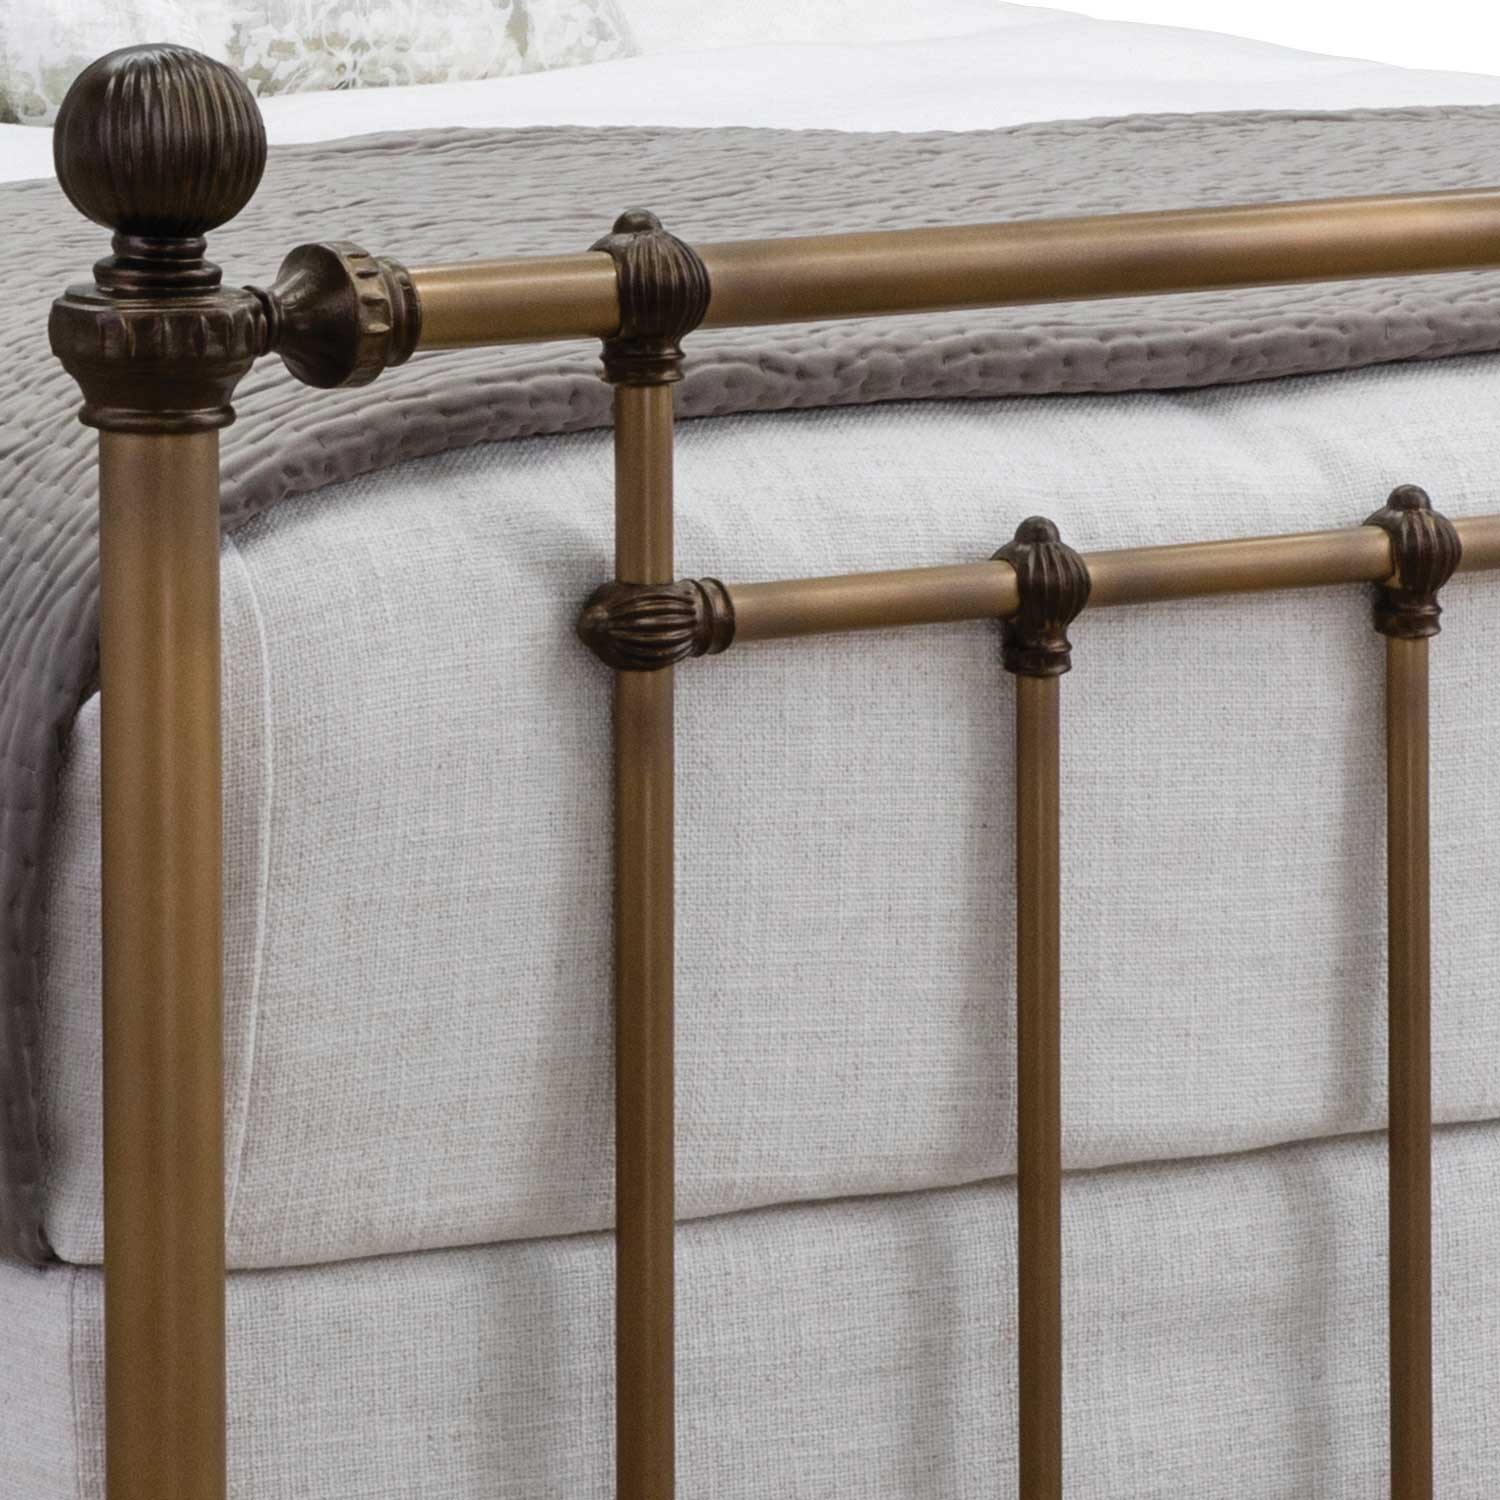 Revere Iron Bed 1315 Wesley Allen Queen CBMPF Aged Brass Finish Matriae